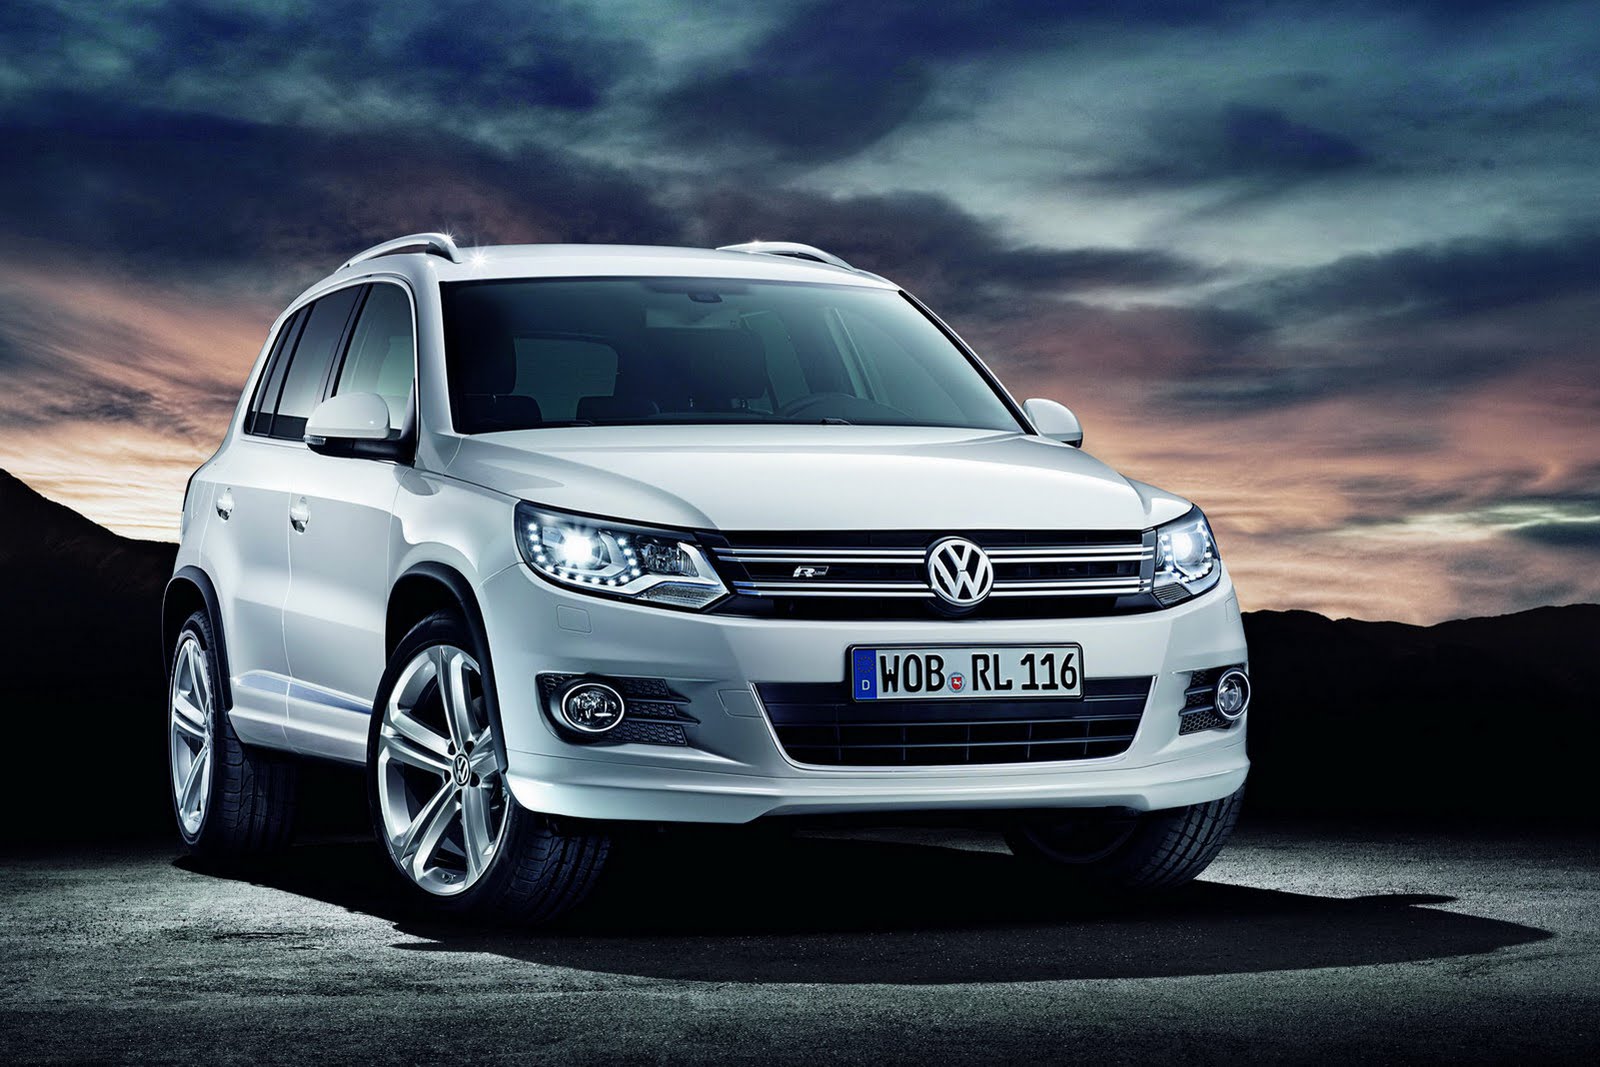 2012 Volkswagen Tiguan Sports up with New R-Line Packages | Carscoops